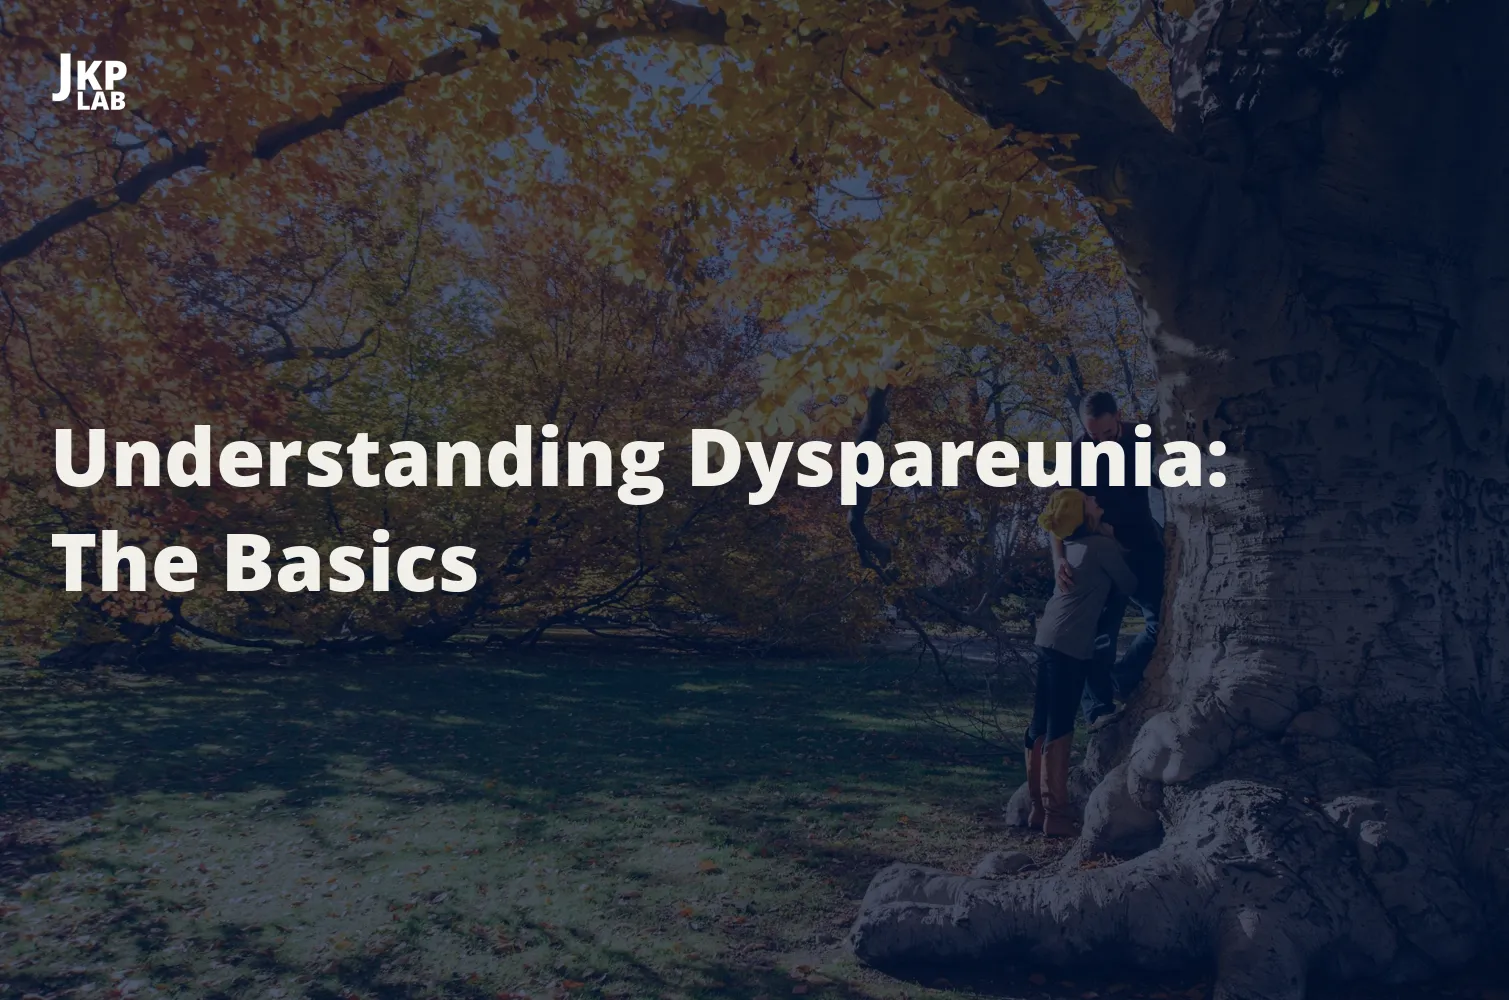 Men's Experience with Dyspareunia